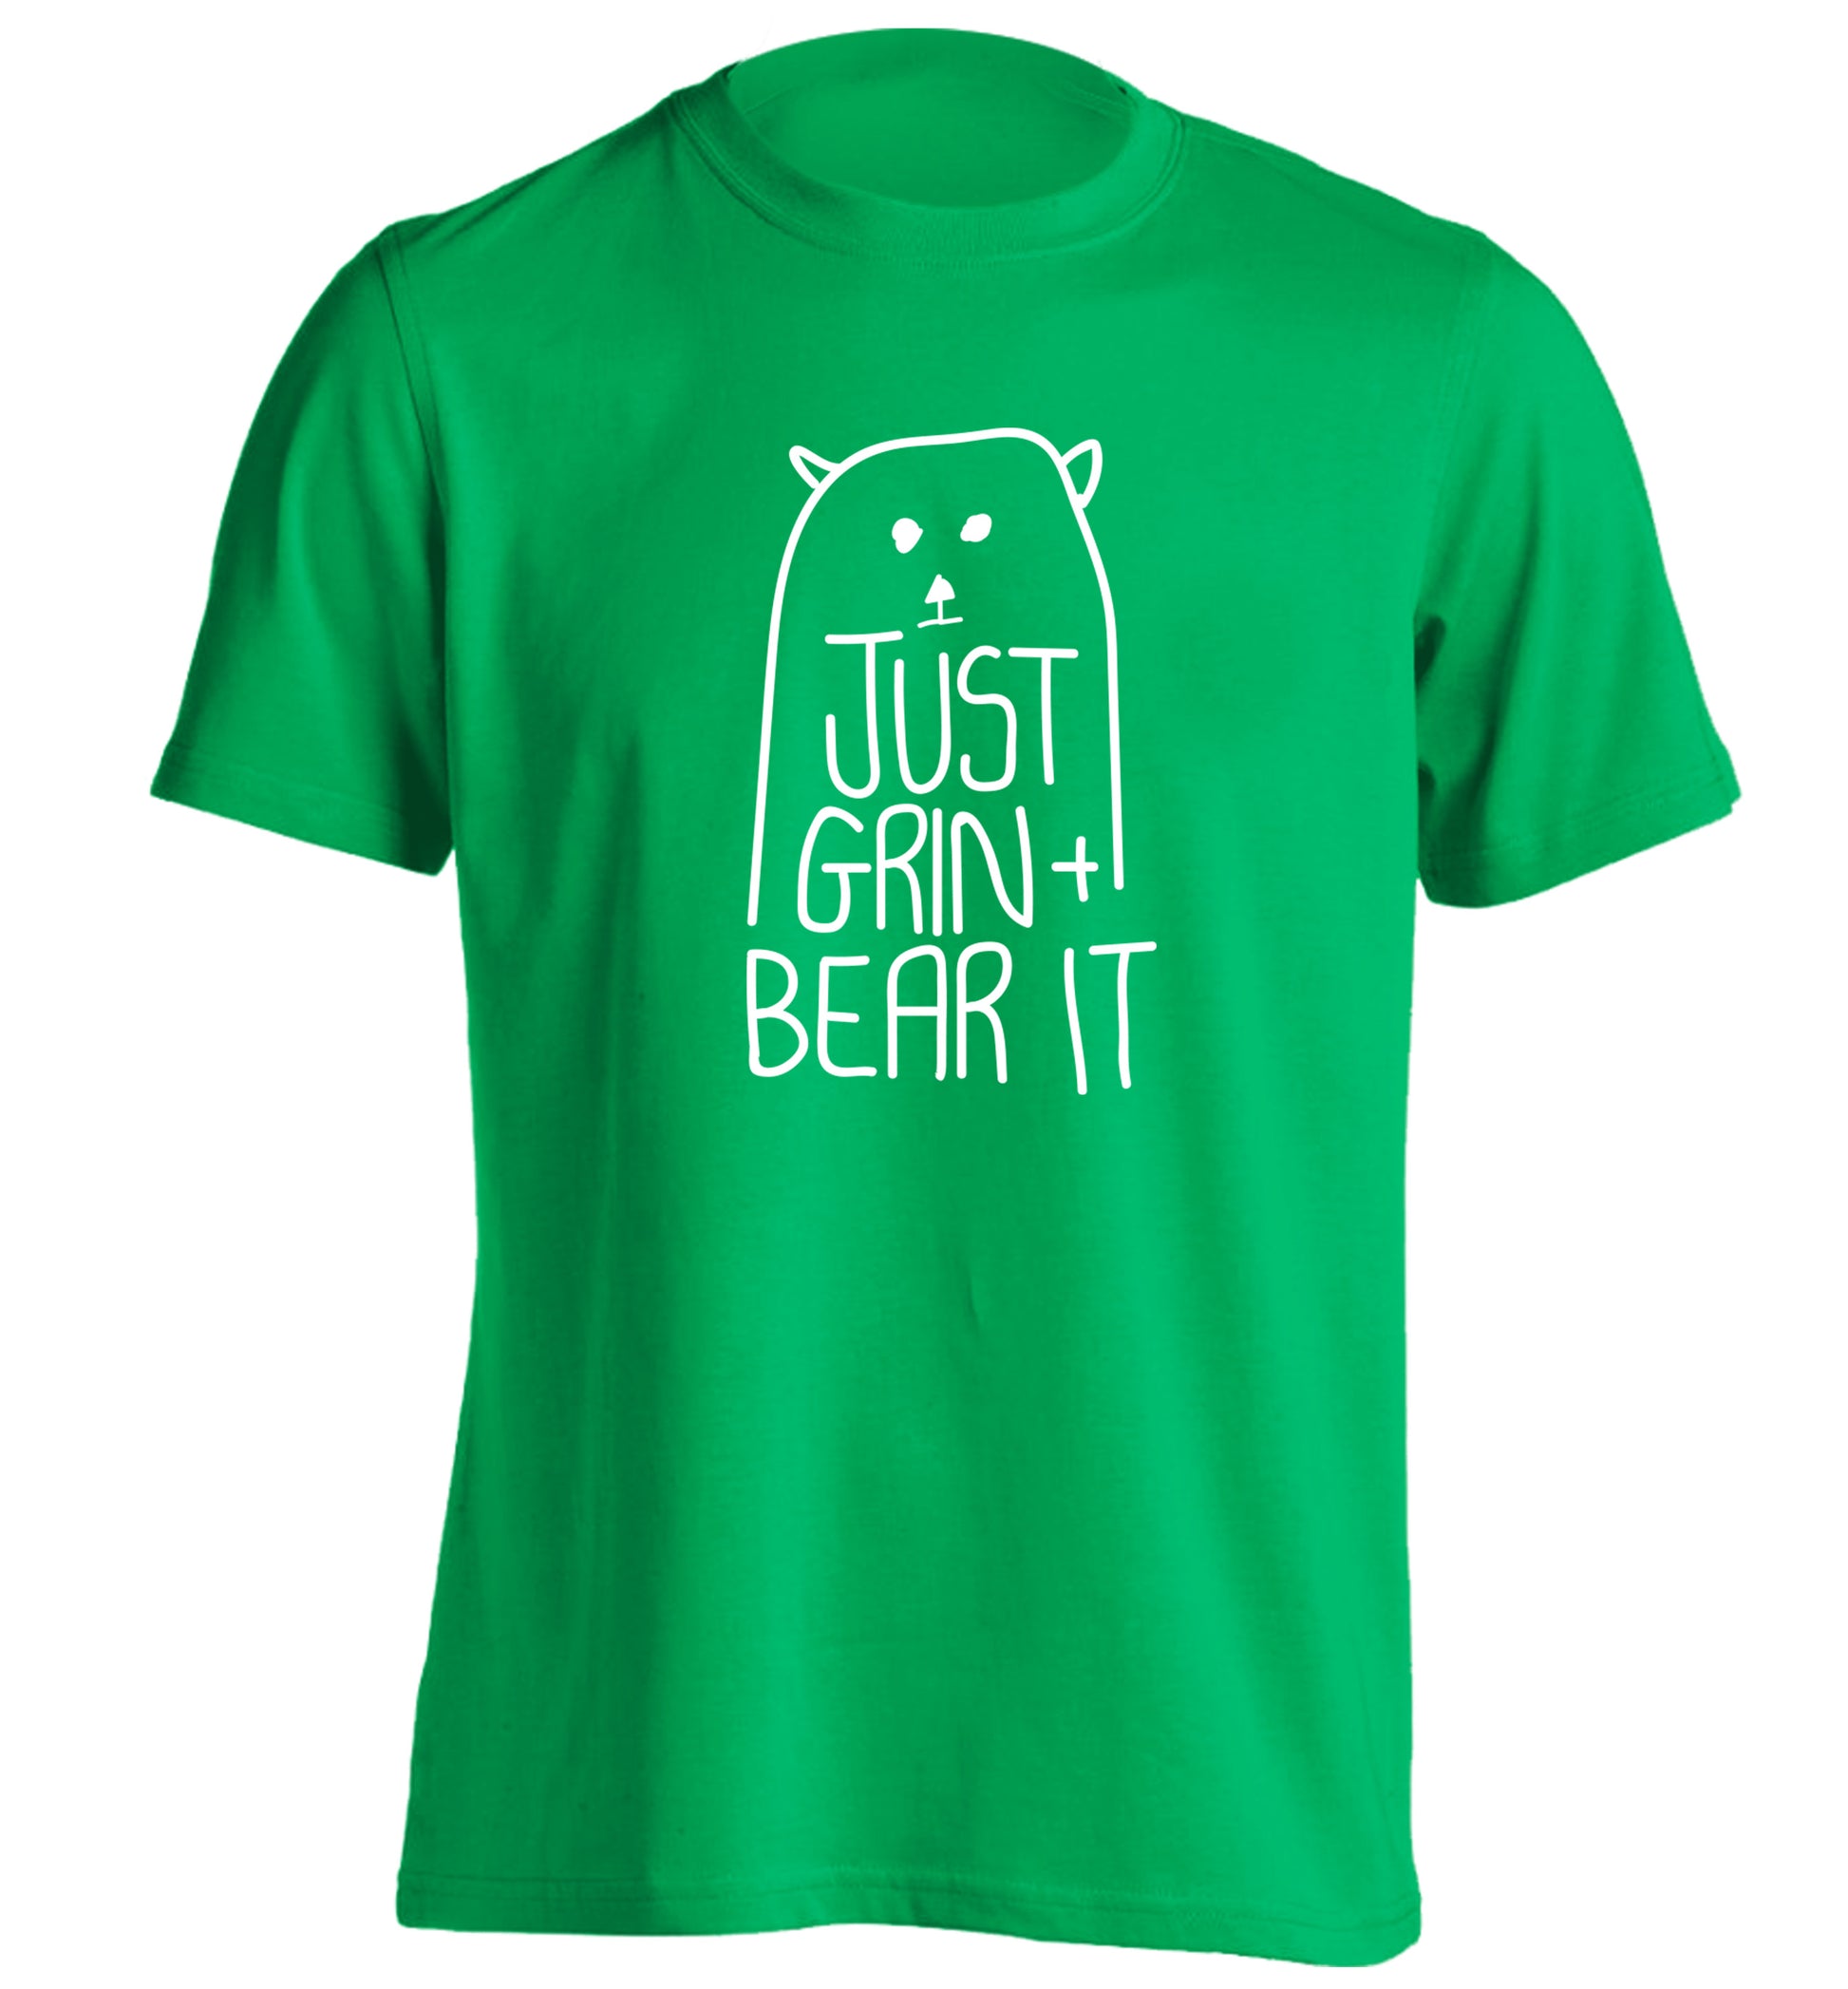 Just grin and bear it adults unisex green Tshirt 2XL